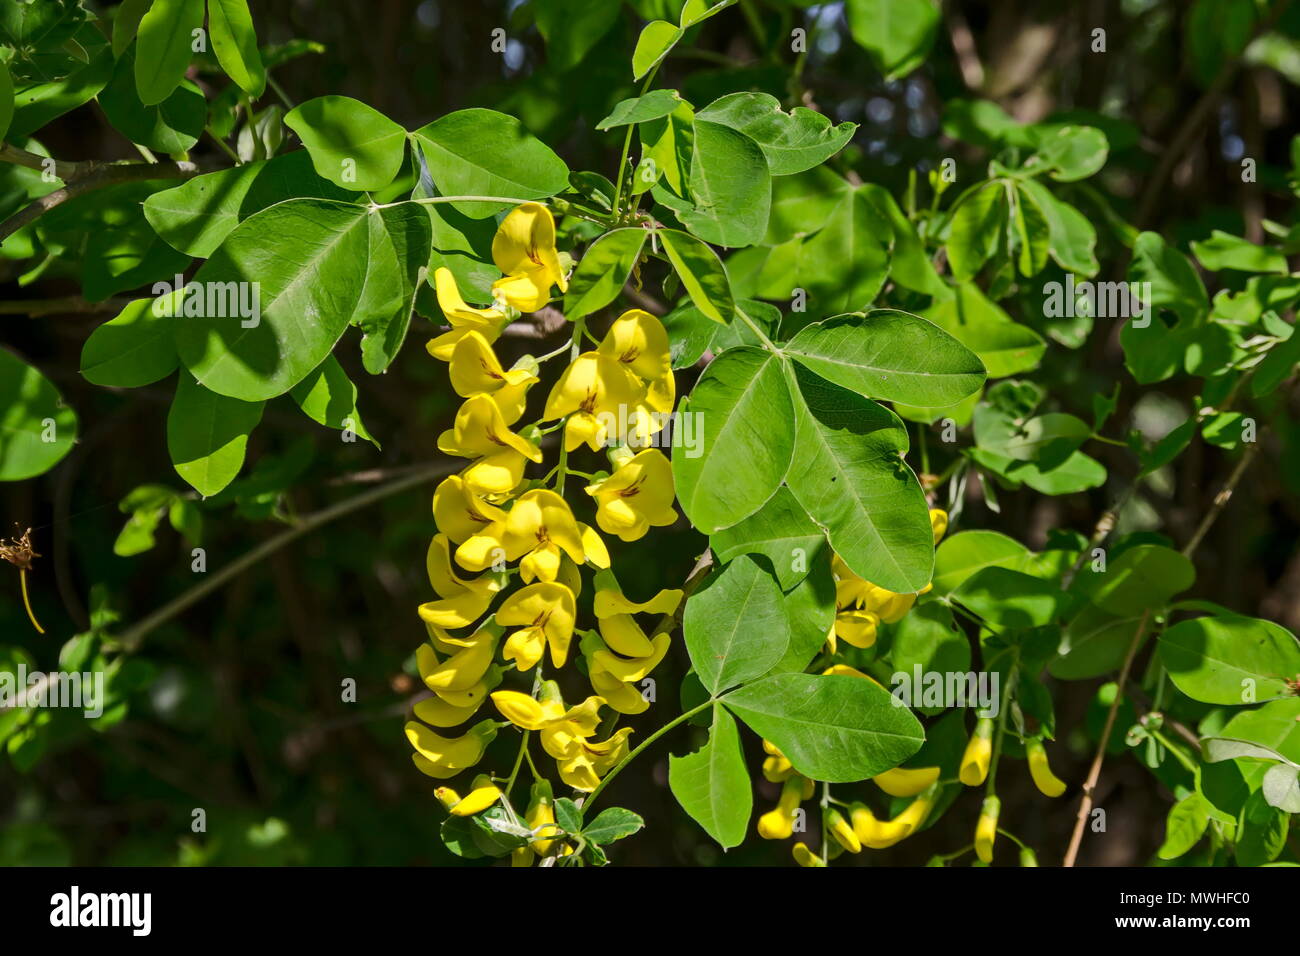 Yellow acacia tree, Siberian peashrub or Caragana arborescens branch with green leaves and yellow bloom flower, South park, Sofia,  Bulgaria Stock Photo